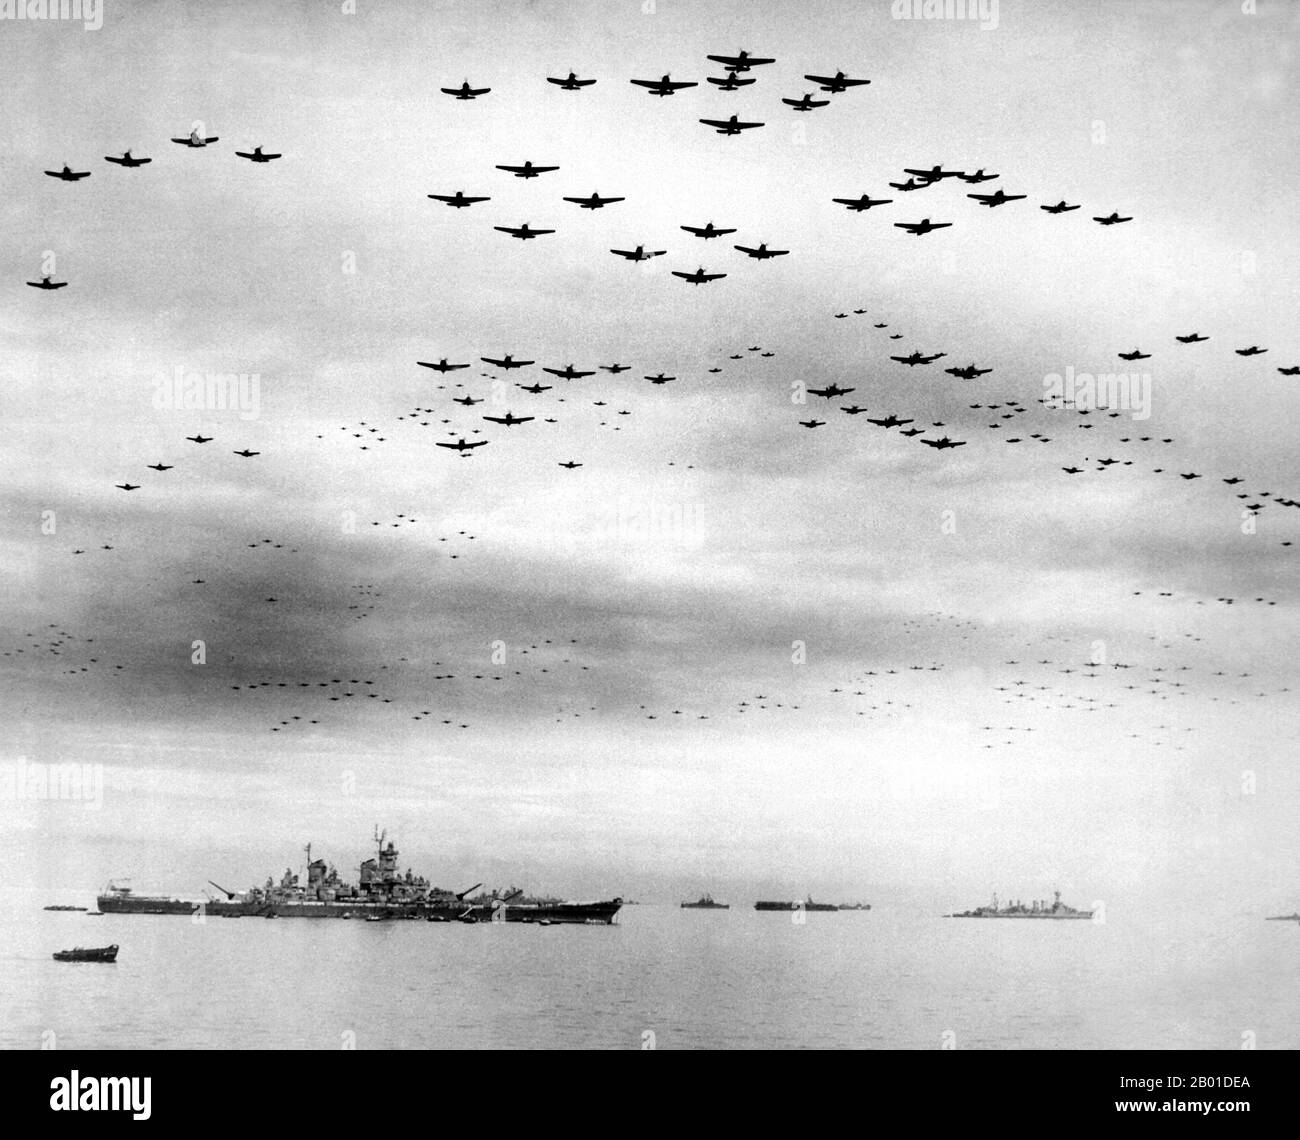 USA/Japan: USAF F4U and F6F planes fly in formation over the USS Missouri and elements of the US fleet in Tokyo Bay during the Japanese surrender ceremonies, September 2, 1945.  On August 28, the occupation of Japan by the Supreme Commander of the Allied Powers began. The surrender ceremony was held on September 2 aboard the U.S. battleship Missouri, at which officials from the Japanese government signed the Japanese Instrument of Surrender, ending World War II. Stock Photo